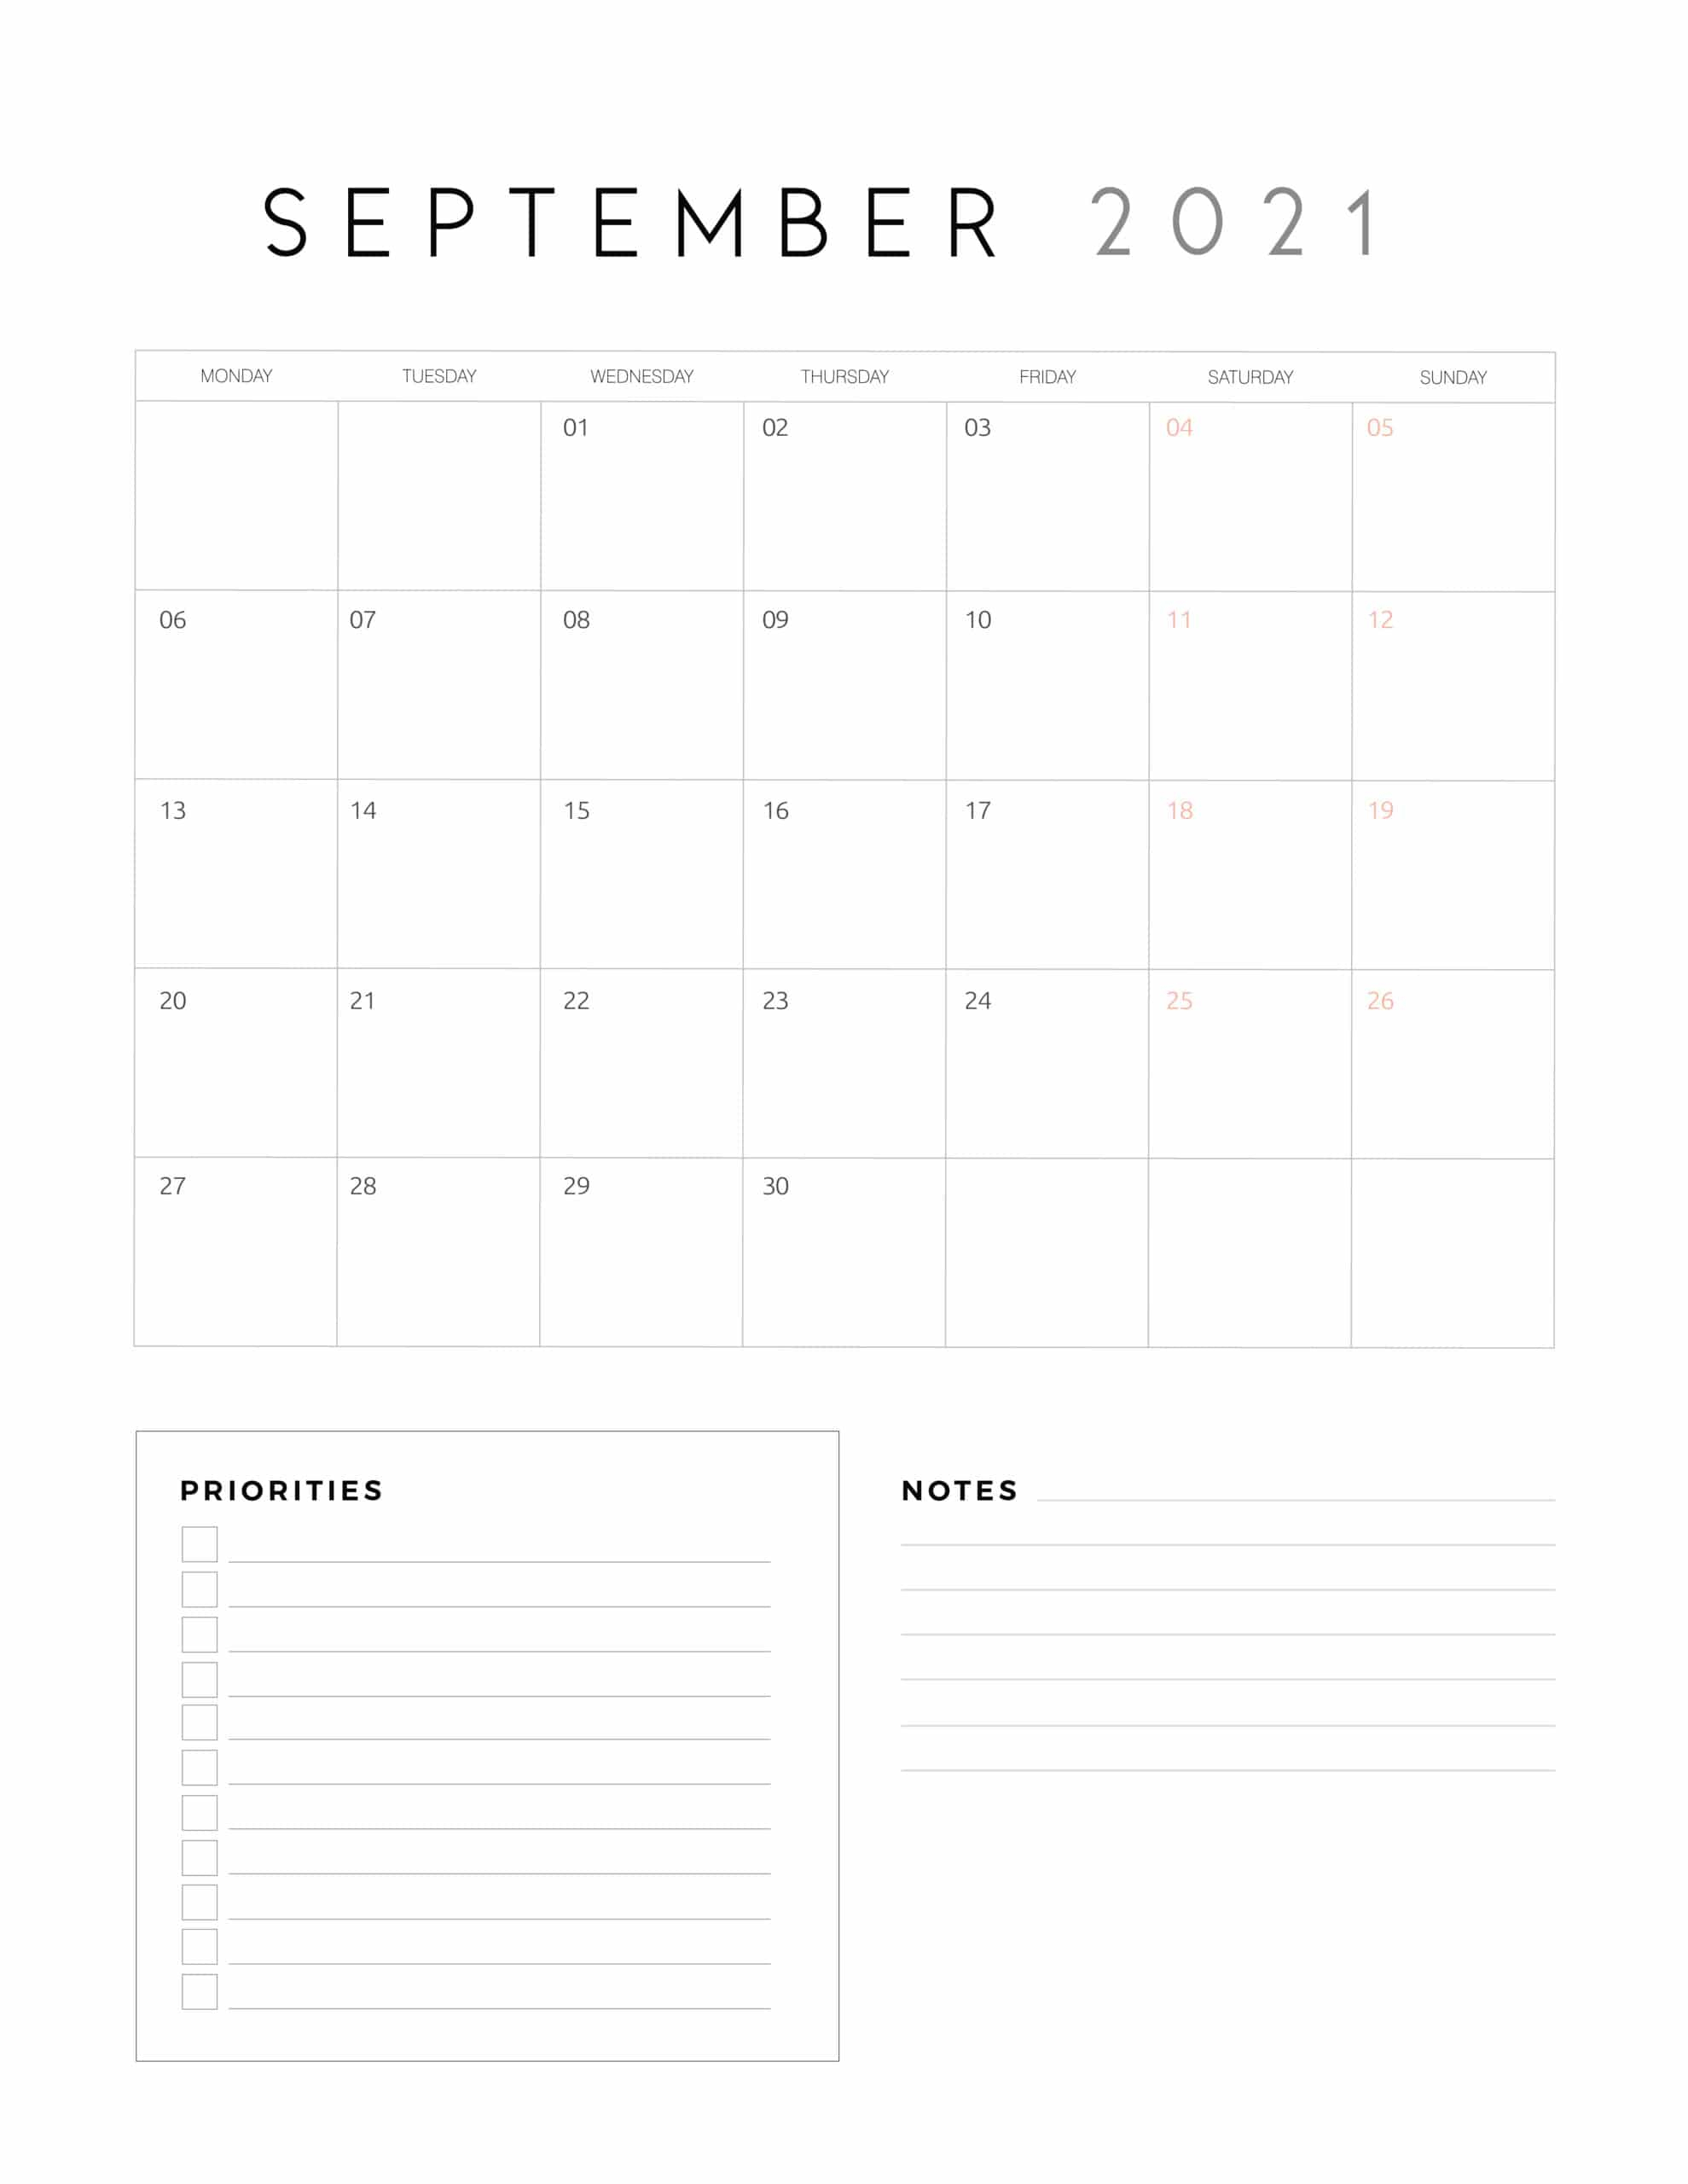 2021 Calendar With Priorities And Notes World Of Printables